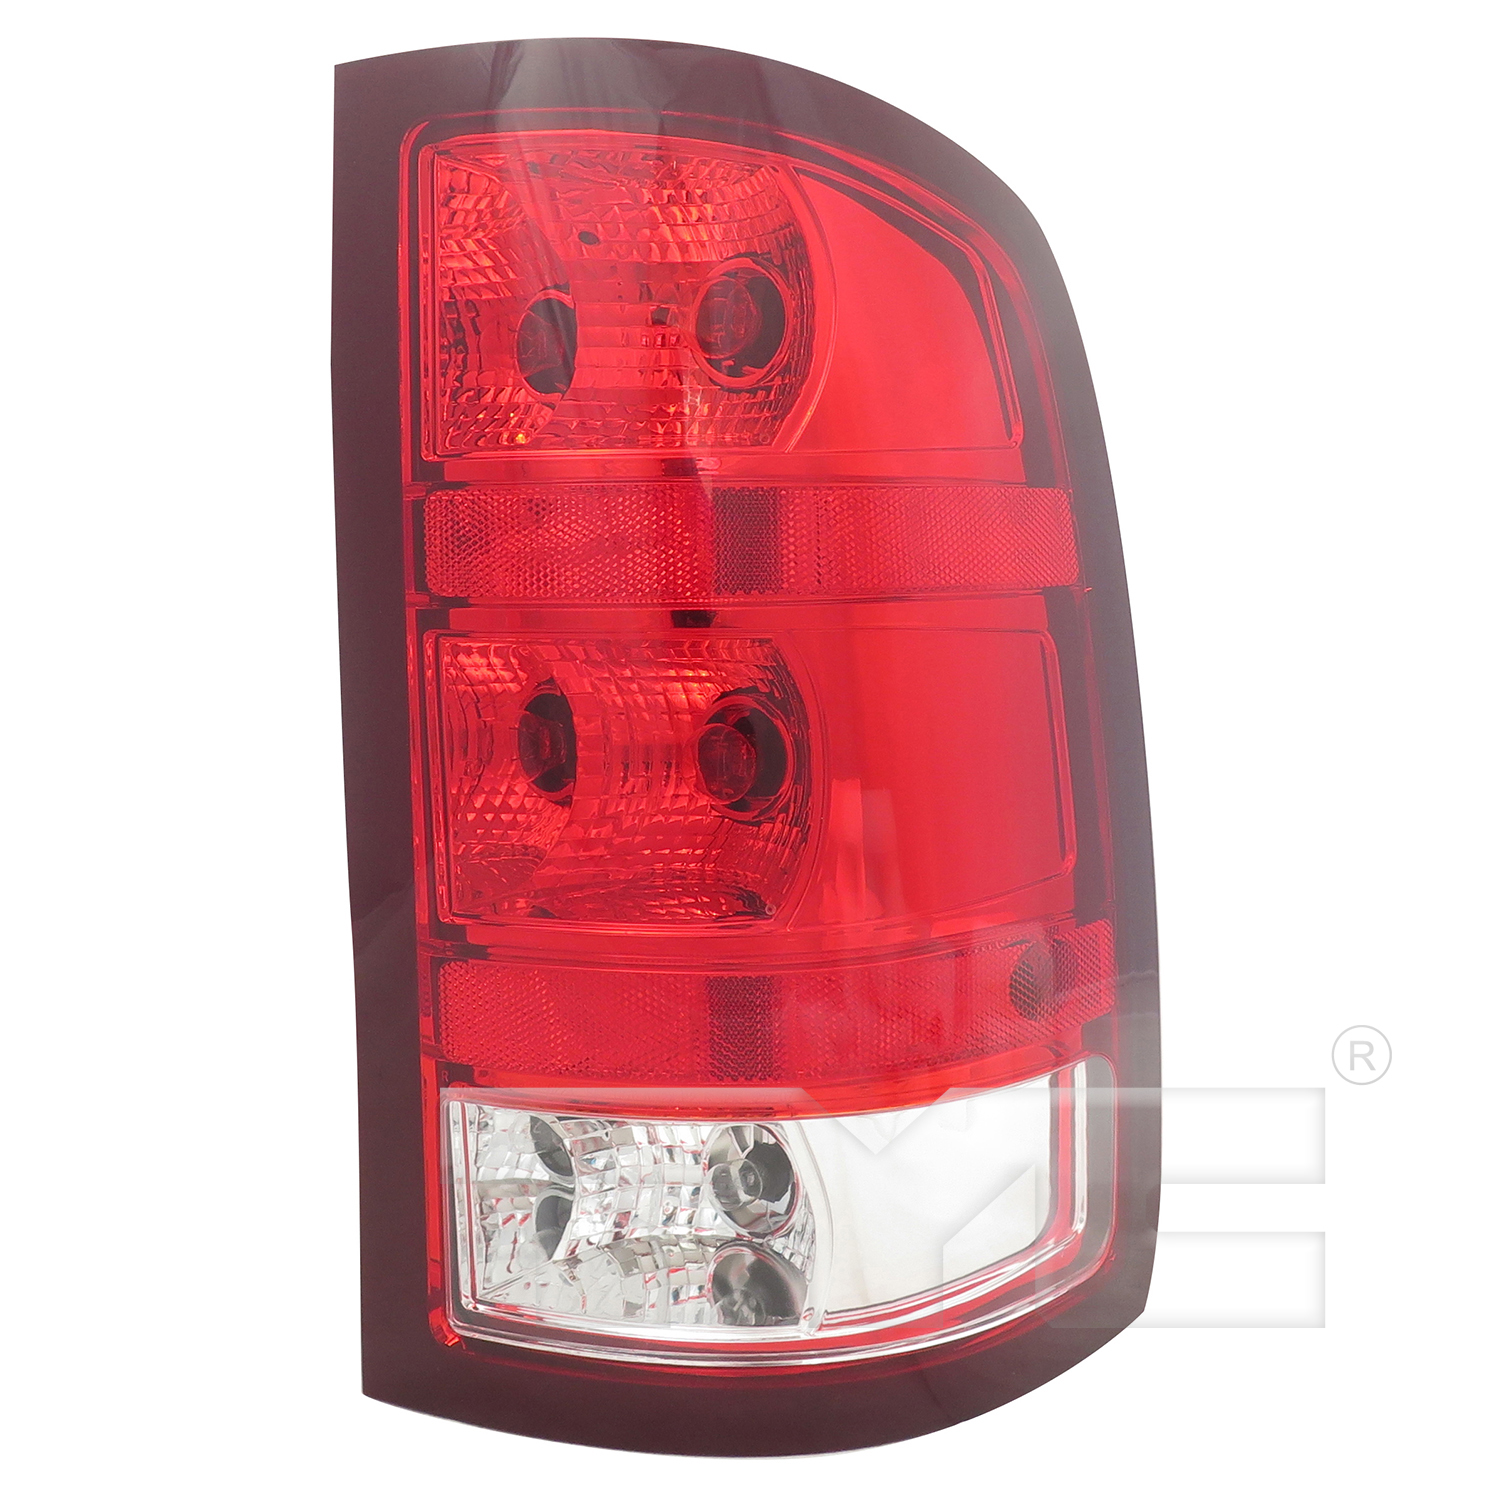 Aftermarket TAILLIGHTS for GMC - SIERRA 3500 HD, SIERRA 3500 HD,10-12,RT Taillamp assy